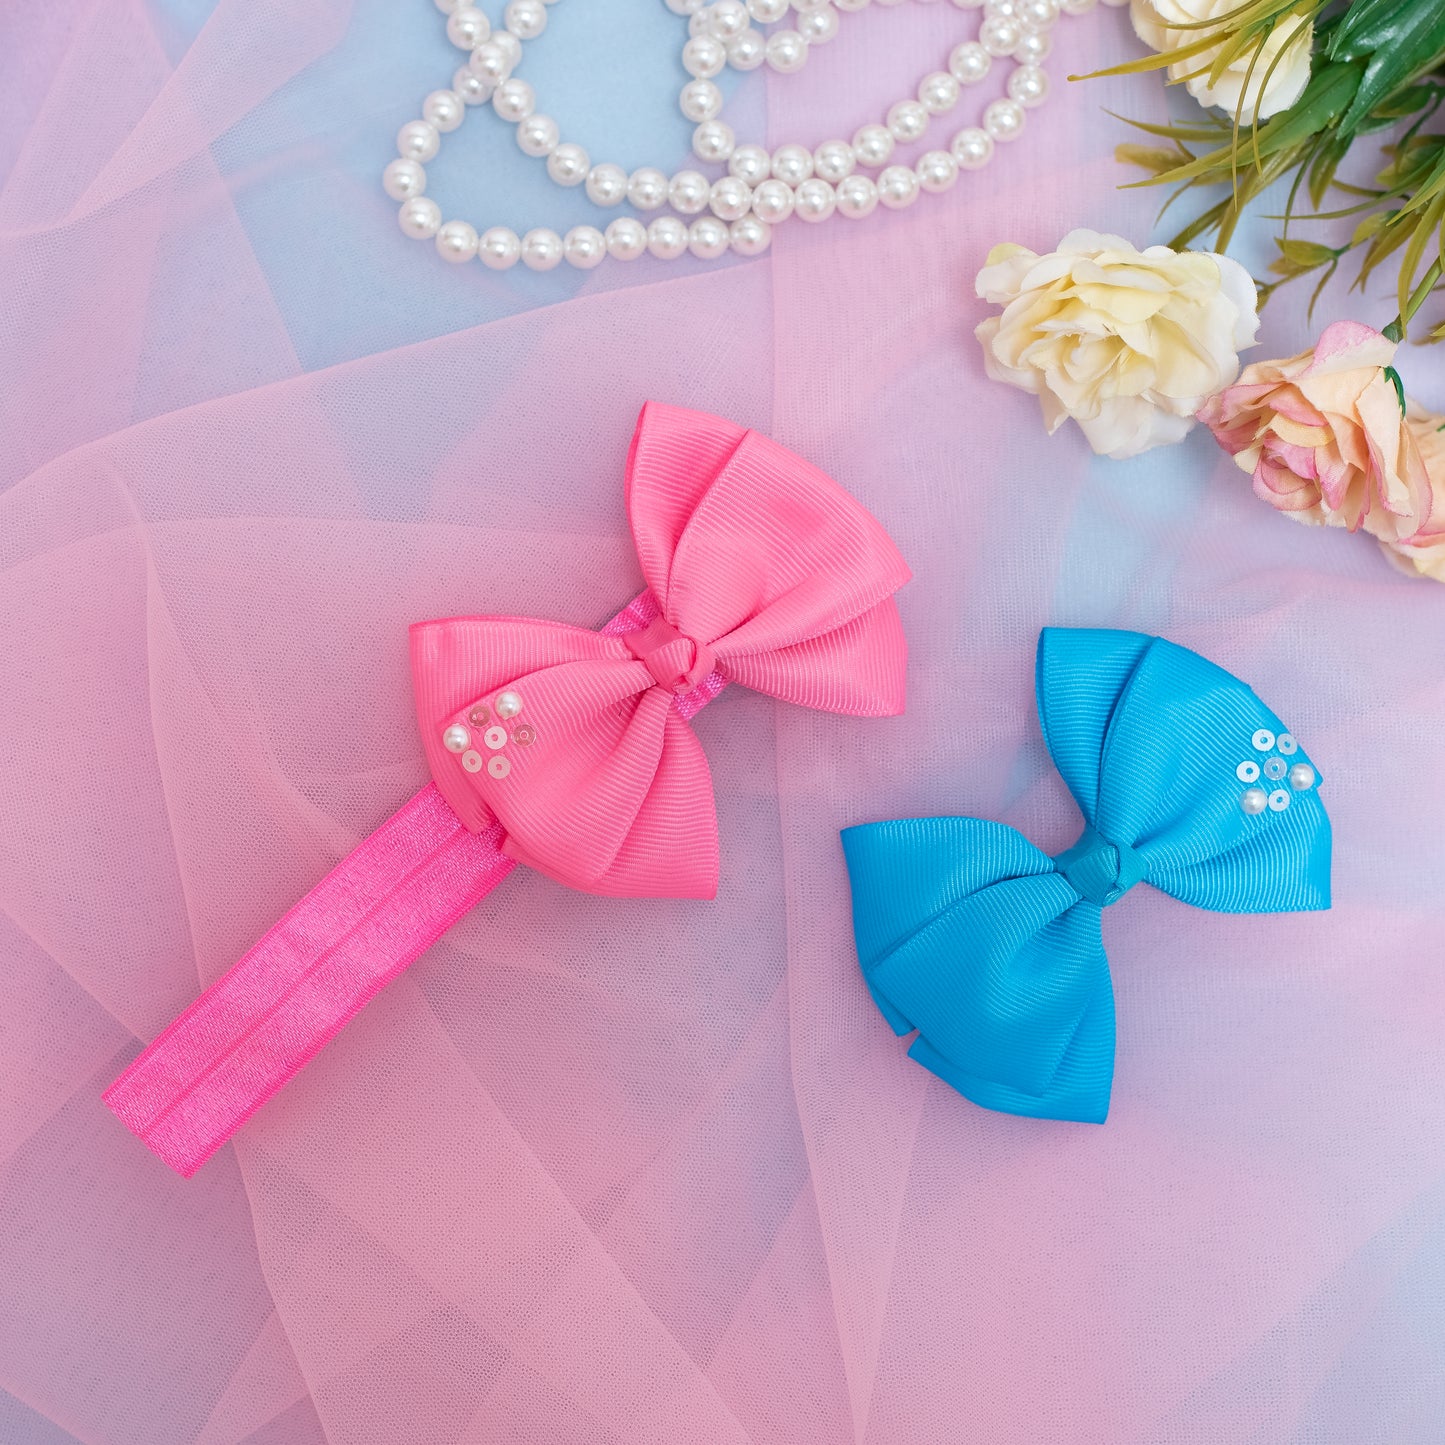 Combo: 1 Stretchy Band with 2 Layered Bows embellished with Sequinze and Pearls - Blue, Pink (Set of 2 Bows, 1 strechy band = 3 quantity)